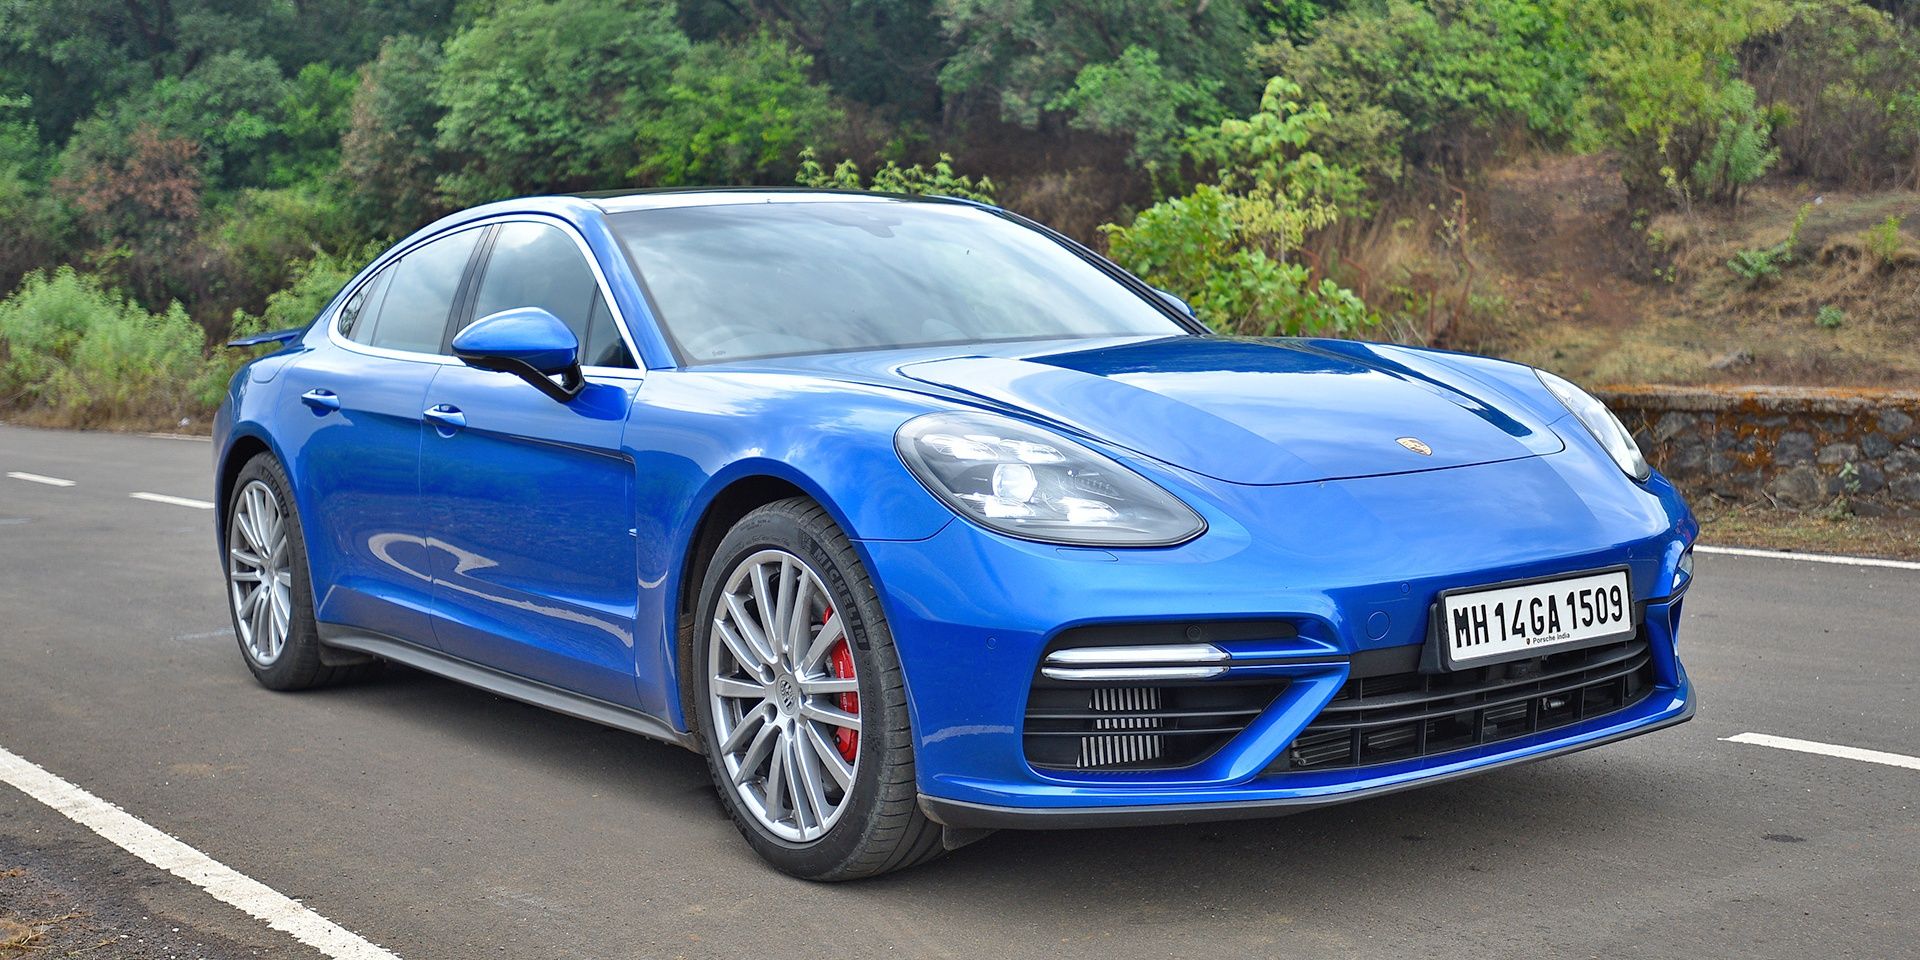 A blue Porsche Panamera Diesel Turbo parked in the middle of the road